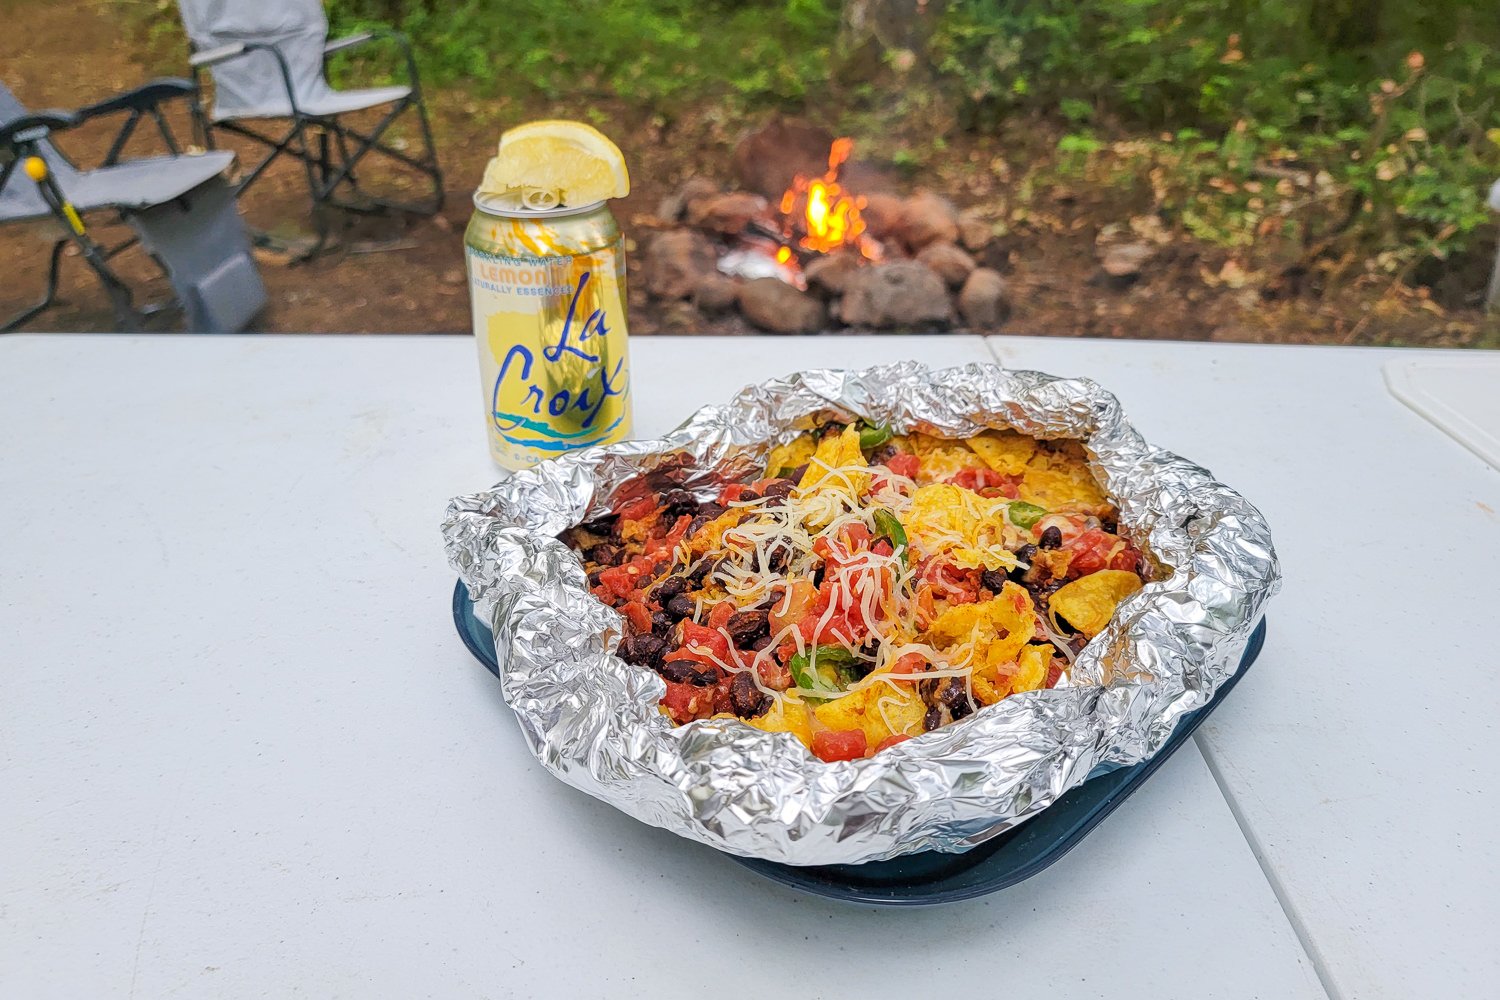 Nachos foil packet meal with a lemon seltzer water and a fire in the background